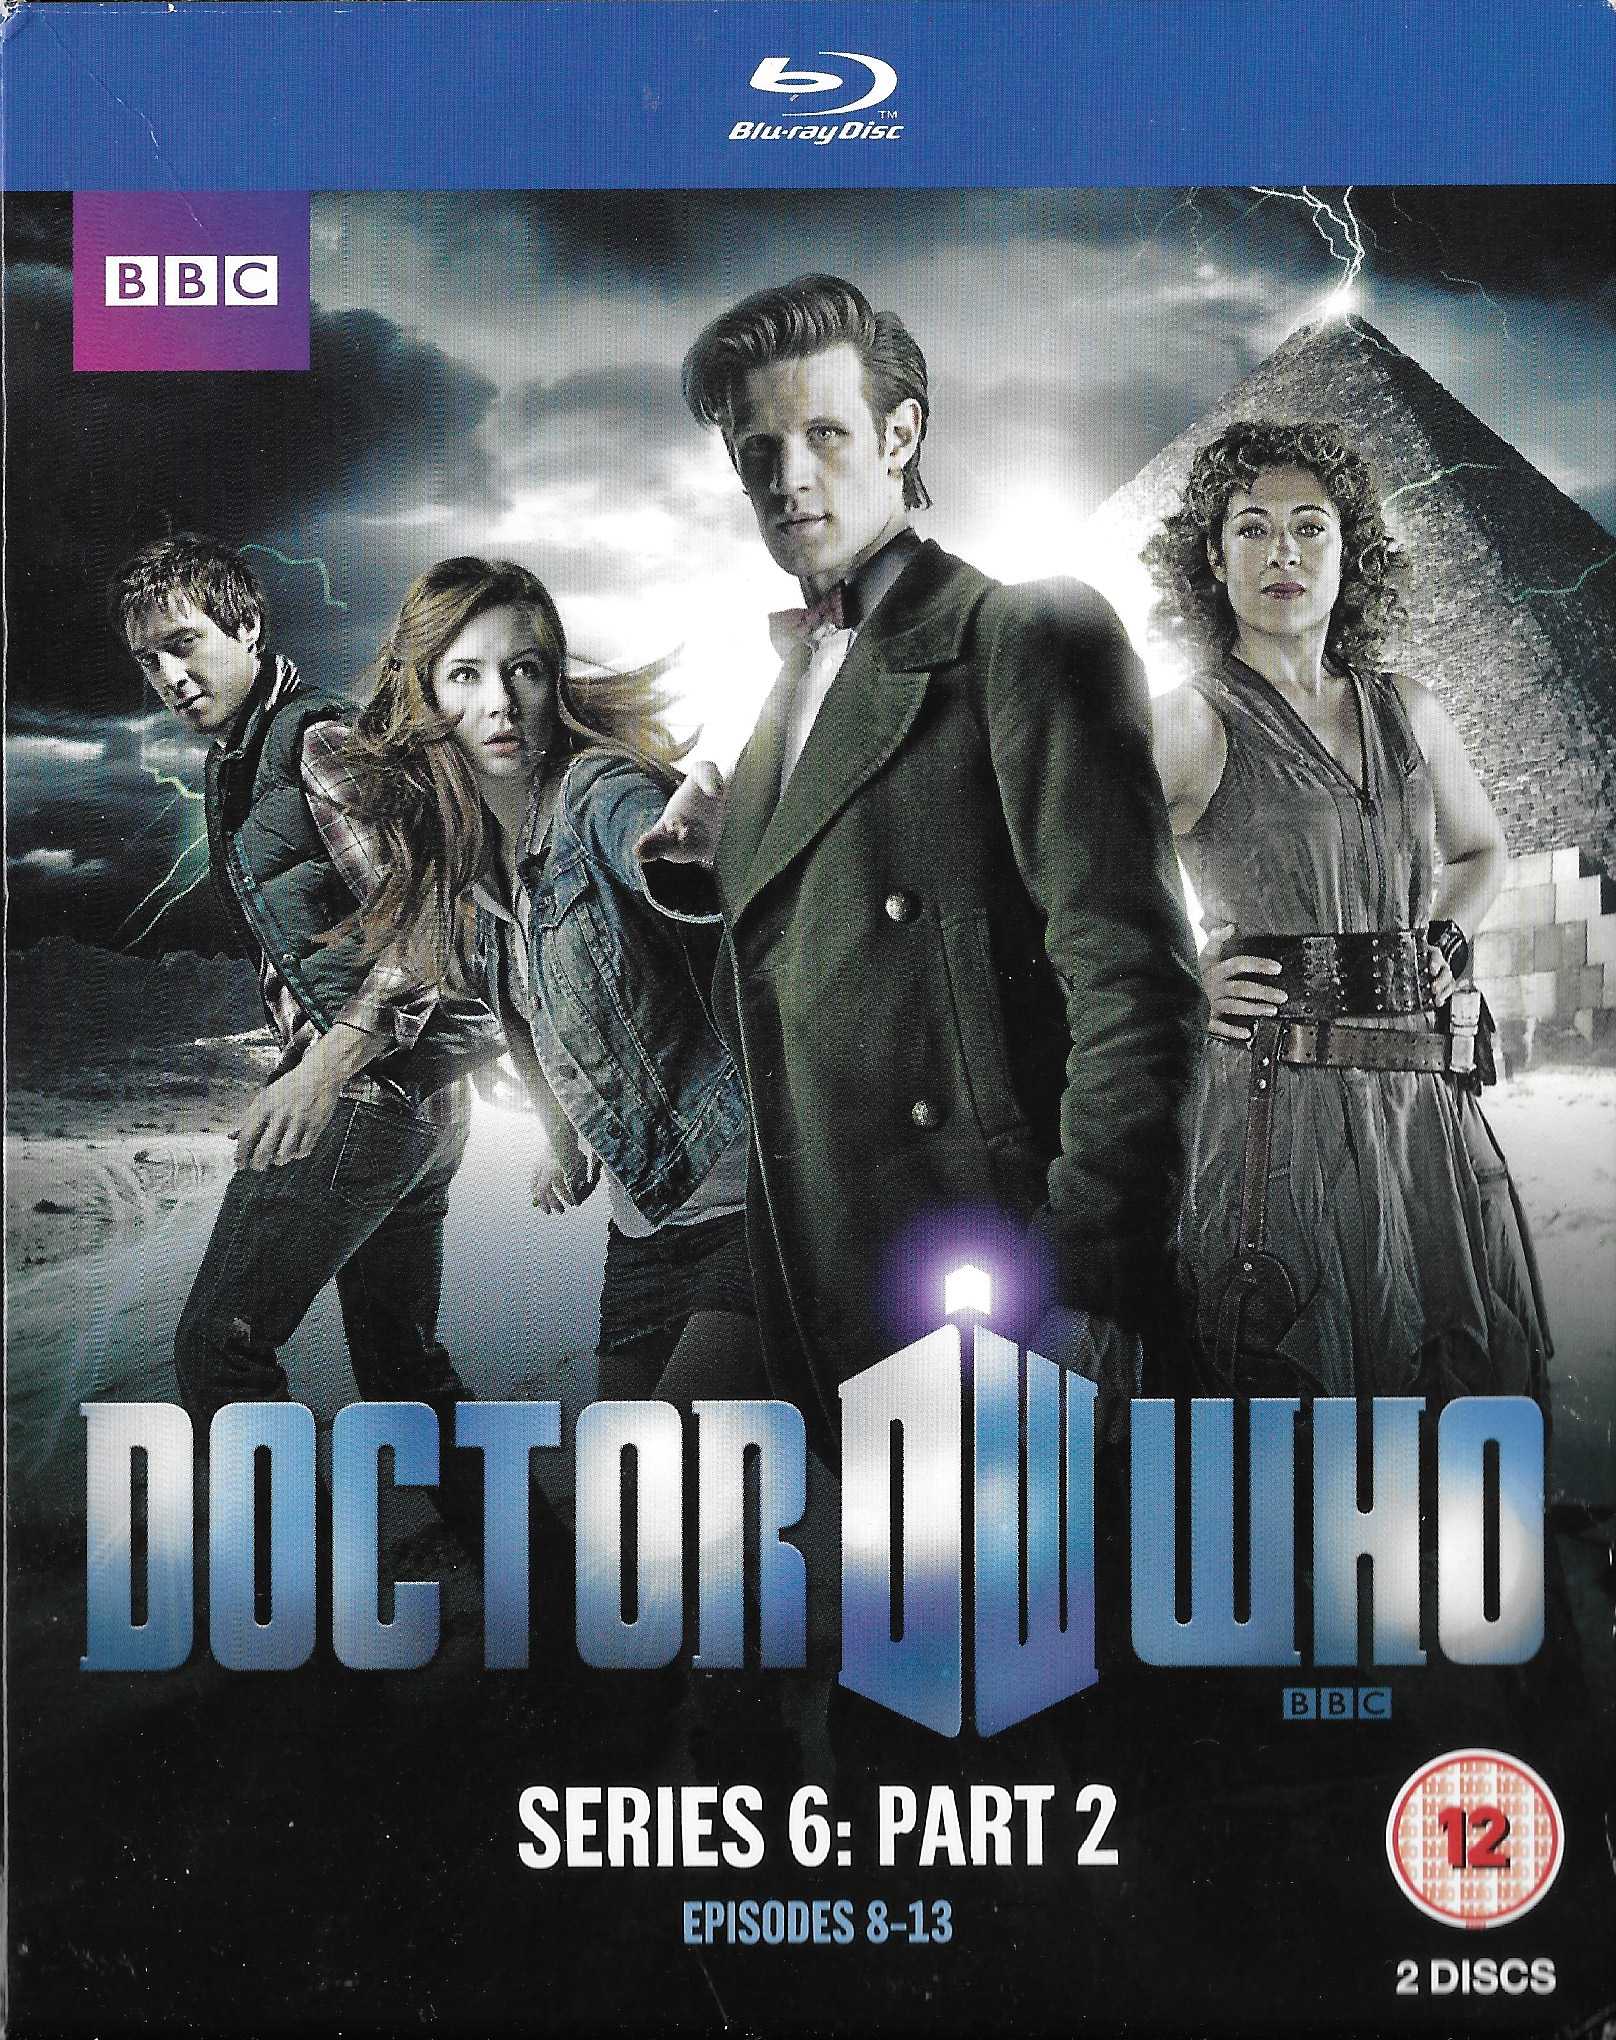 Picture of BBCBD 0152 Doctor Who - Series 6, part 2 by artist Steven Moffat / Mark Gatiss / Tom Macrae / Toby Whithouse / Gareth Roberts from the BBC records and Tapes library